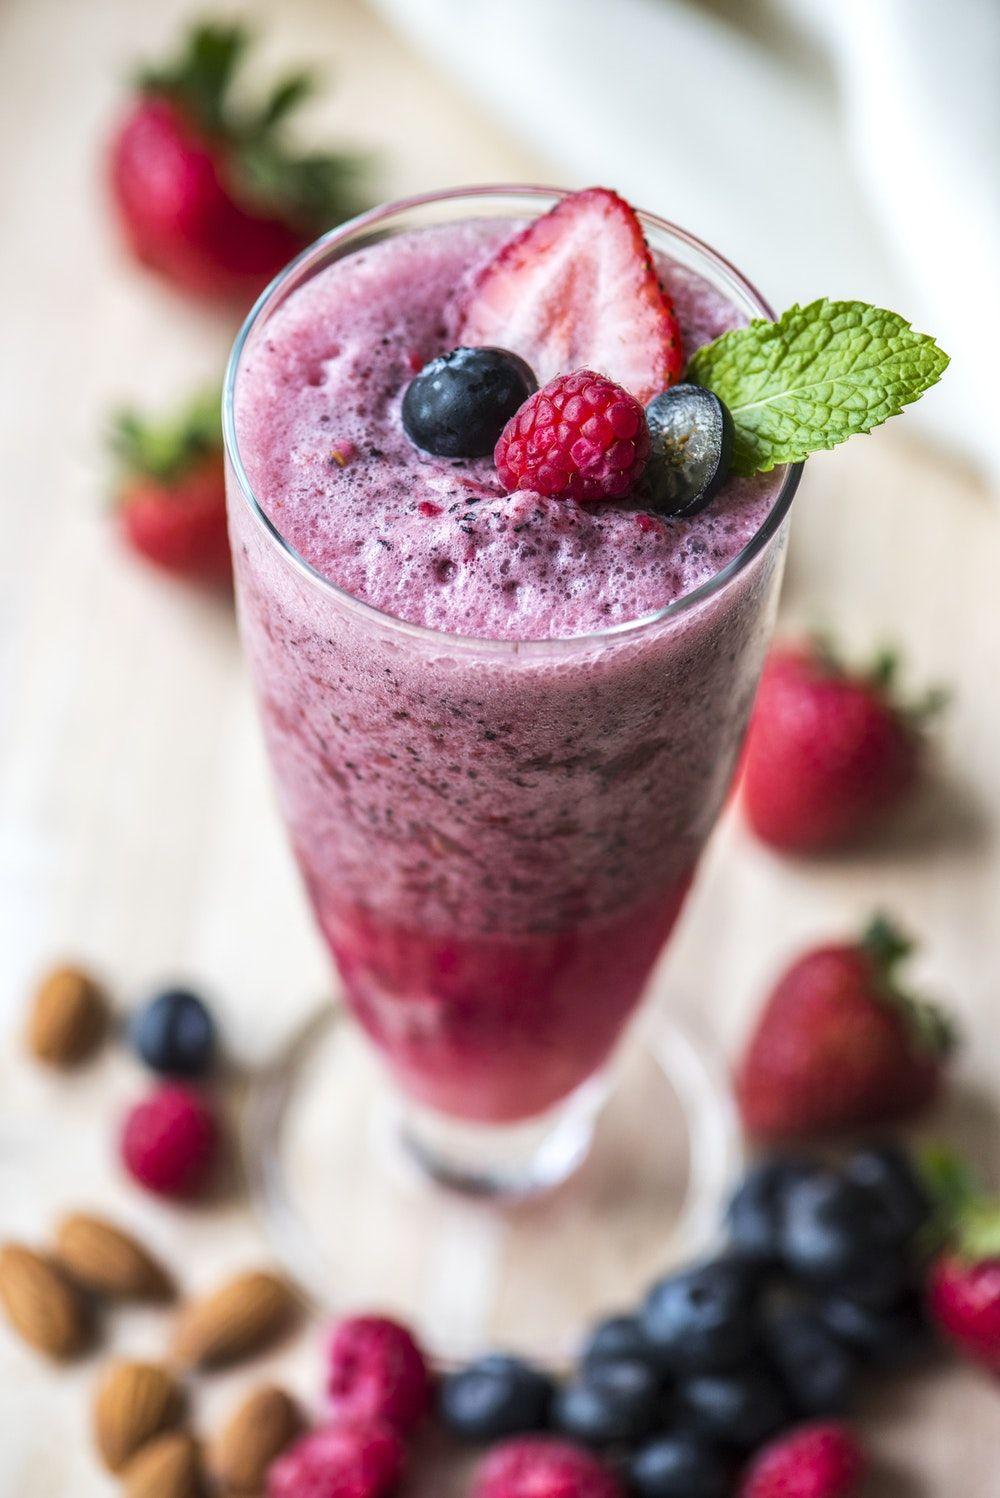 Smoothie Picture. Download Free Image